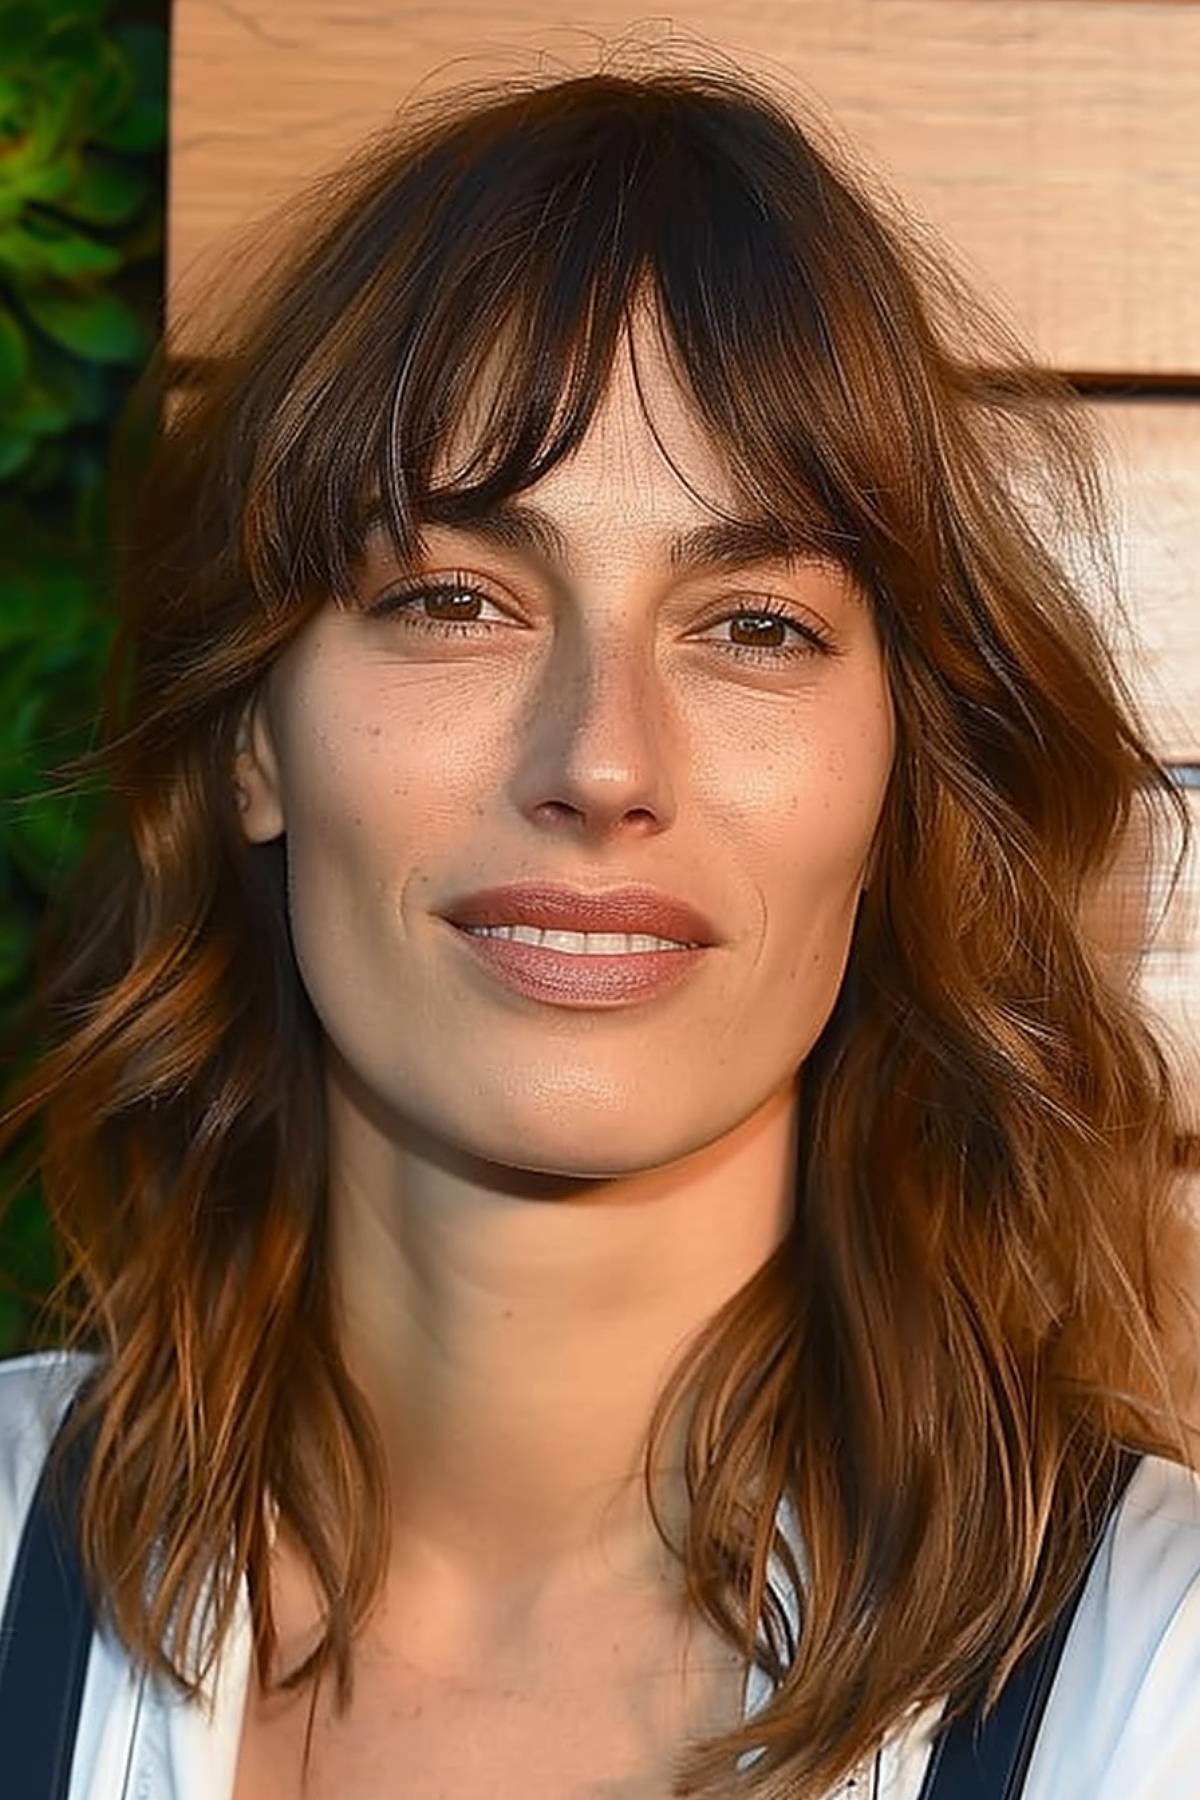 Face-framing bangs are designed to add width and balance to elongated face shapes.